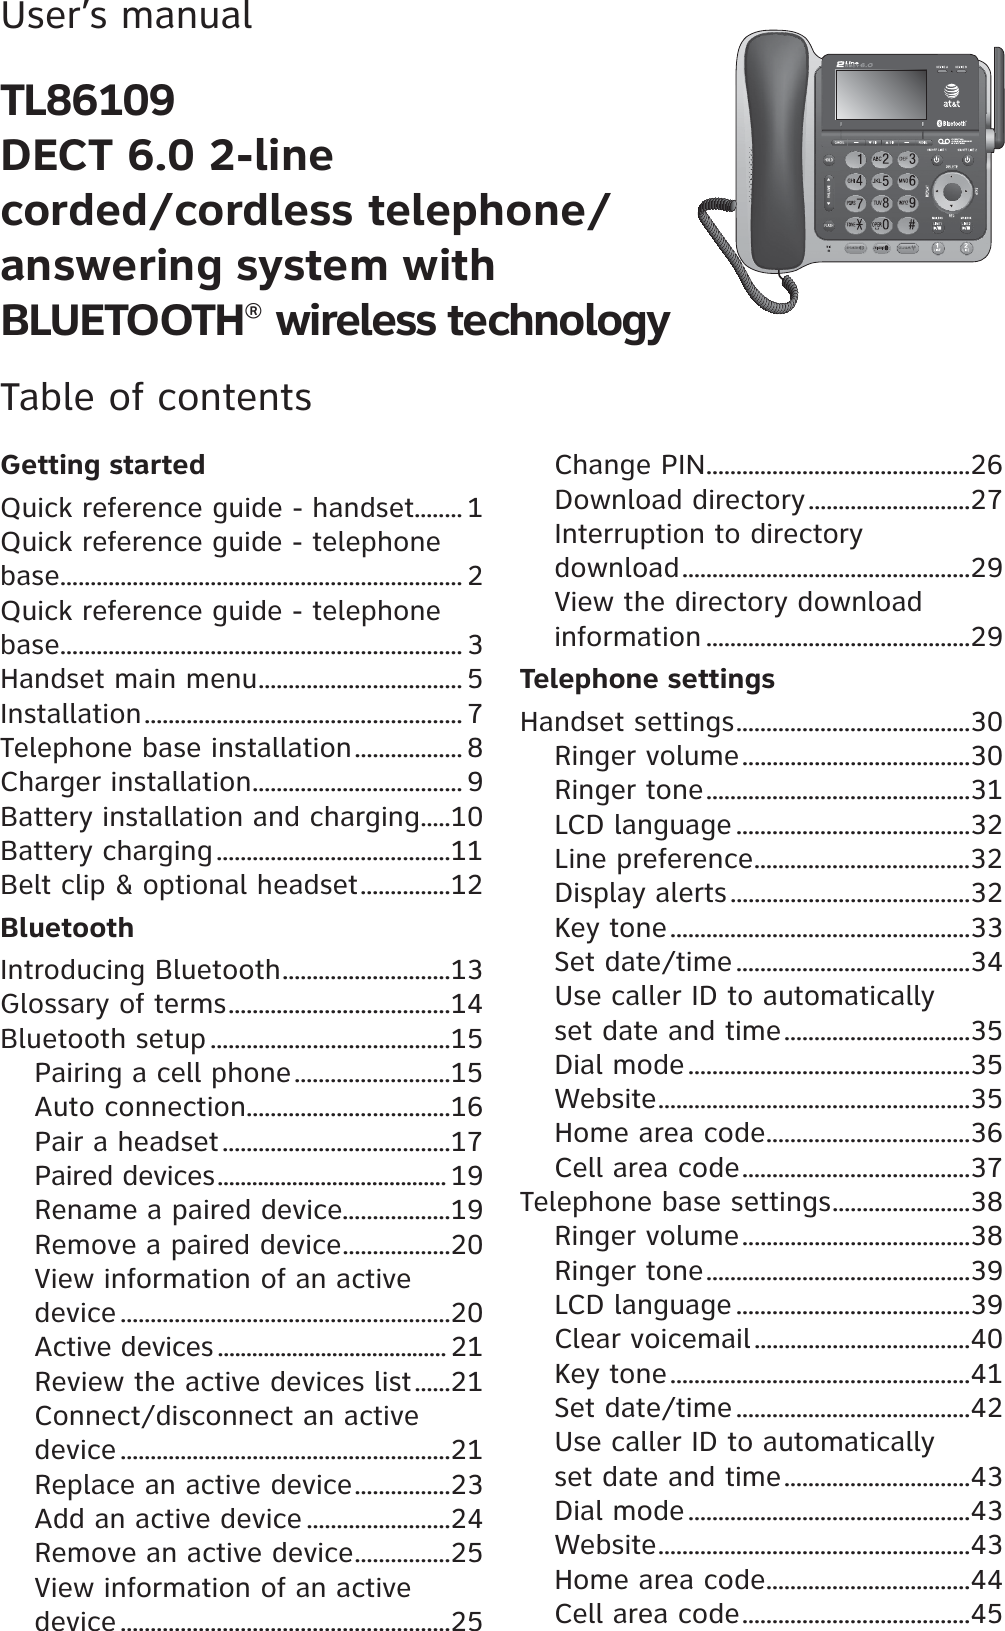 User’s manualTL86109DECT 6.0 2-linecorded/cordless telephone/answering system with BLUETOOTH® wireless technologyTable of contentsGetting startedQuick reference guide - handset........ 1Quick reference guide - telephone base................................................................... 2Quick reference guide - telephone base................................................................... 3Handset main menu.................................. 5Installation..................................................... 7Telephone base installation.................. 8Charger installation................................... 9Battery installation and charging.....10Battery charging.......................................11Belt clip &amp; optional headset...............12BluetoothIntroducing Bluetooth............................13Glossary of terms.....................................14Bluetooth setup ........................................15Pairing a cell phone..........................15Auto connection..................................16Pair a headset......................................17Paired devices........................................ 19Rename a paired device..................19Remove a paired device..................20View information of an active device .......................................................20Active devices ........................................ 21Review the active devices list......21Connect/disconnect an active device .......................................................21Replace an active device................23Add an active device ........................24Remove an active device................25View information of an active device .......................................................25Change PIN............................................26Download directory...........................27Interruption to directory download................................................29View the directory download information ............................................29Telephone settingsHandset settings.......................................30Ringer volume......................................30Ringer tone............................................31LCD language .......................................32Line preference....................................32Display alerts........................................32Key tone..................................................33Set date/time.......................................34Use caller ID to automatically set date and time...............................35Dial mode...............................................35Website....................................................35Home area code..................................36Cell area code......................................37Telephone base settings.......................38Ringer volume......................................38Ringer tone............................................39LCD language .......................................39Clear voicemail....................................40Key tone..................................................41Set date/time.......................................42Use caller ID to automatically set date and time...............................43Dial mode...............................................43Website....................................................43Home area code..................................44Cell area code......................................45